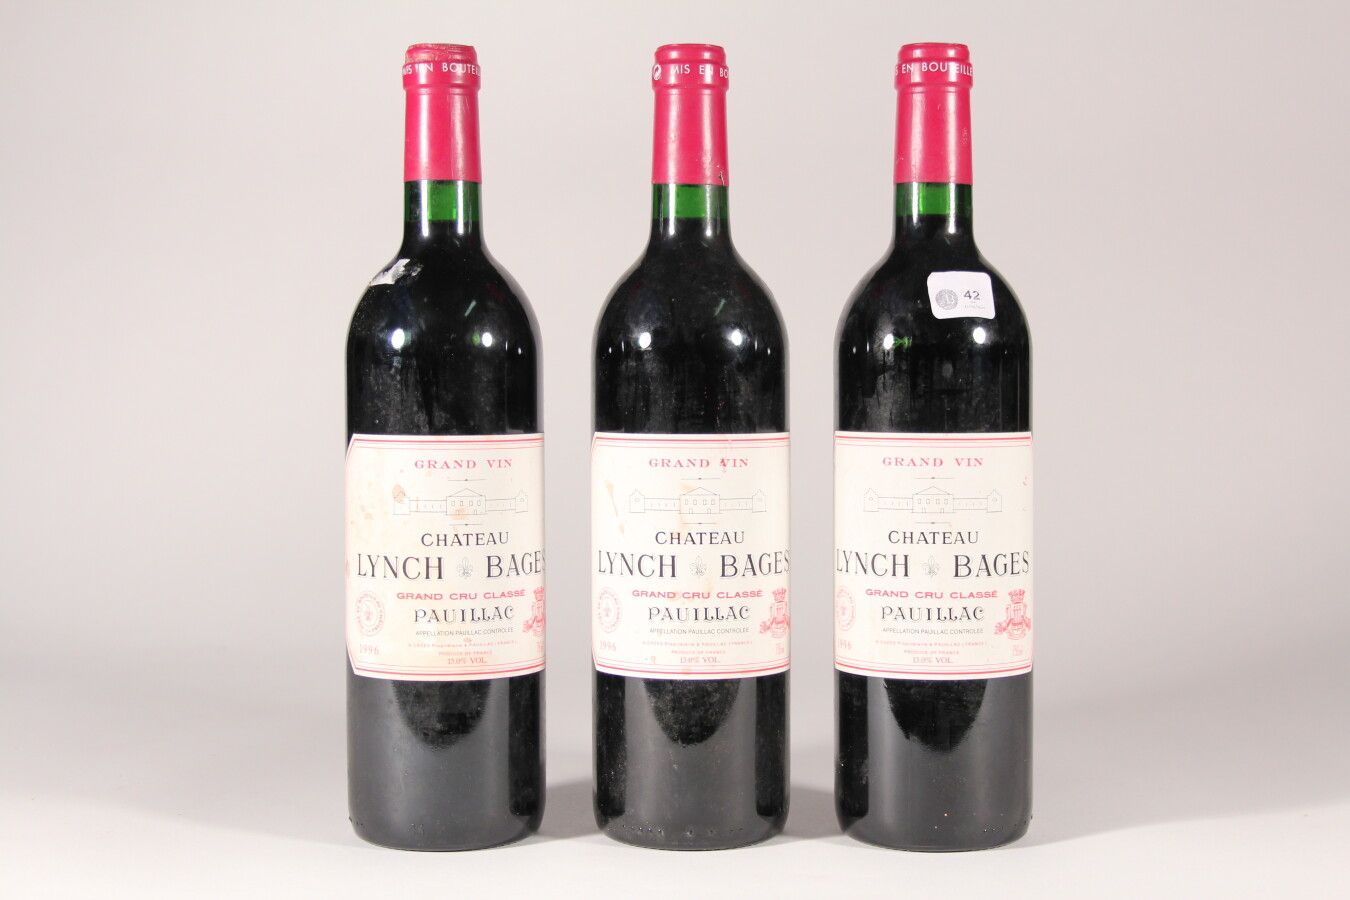 Null 1996 - Château Lynch Bages

Pauillac Red - 3 bottles